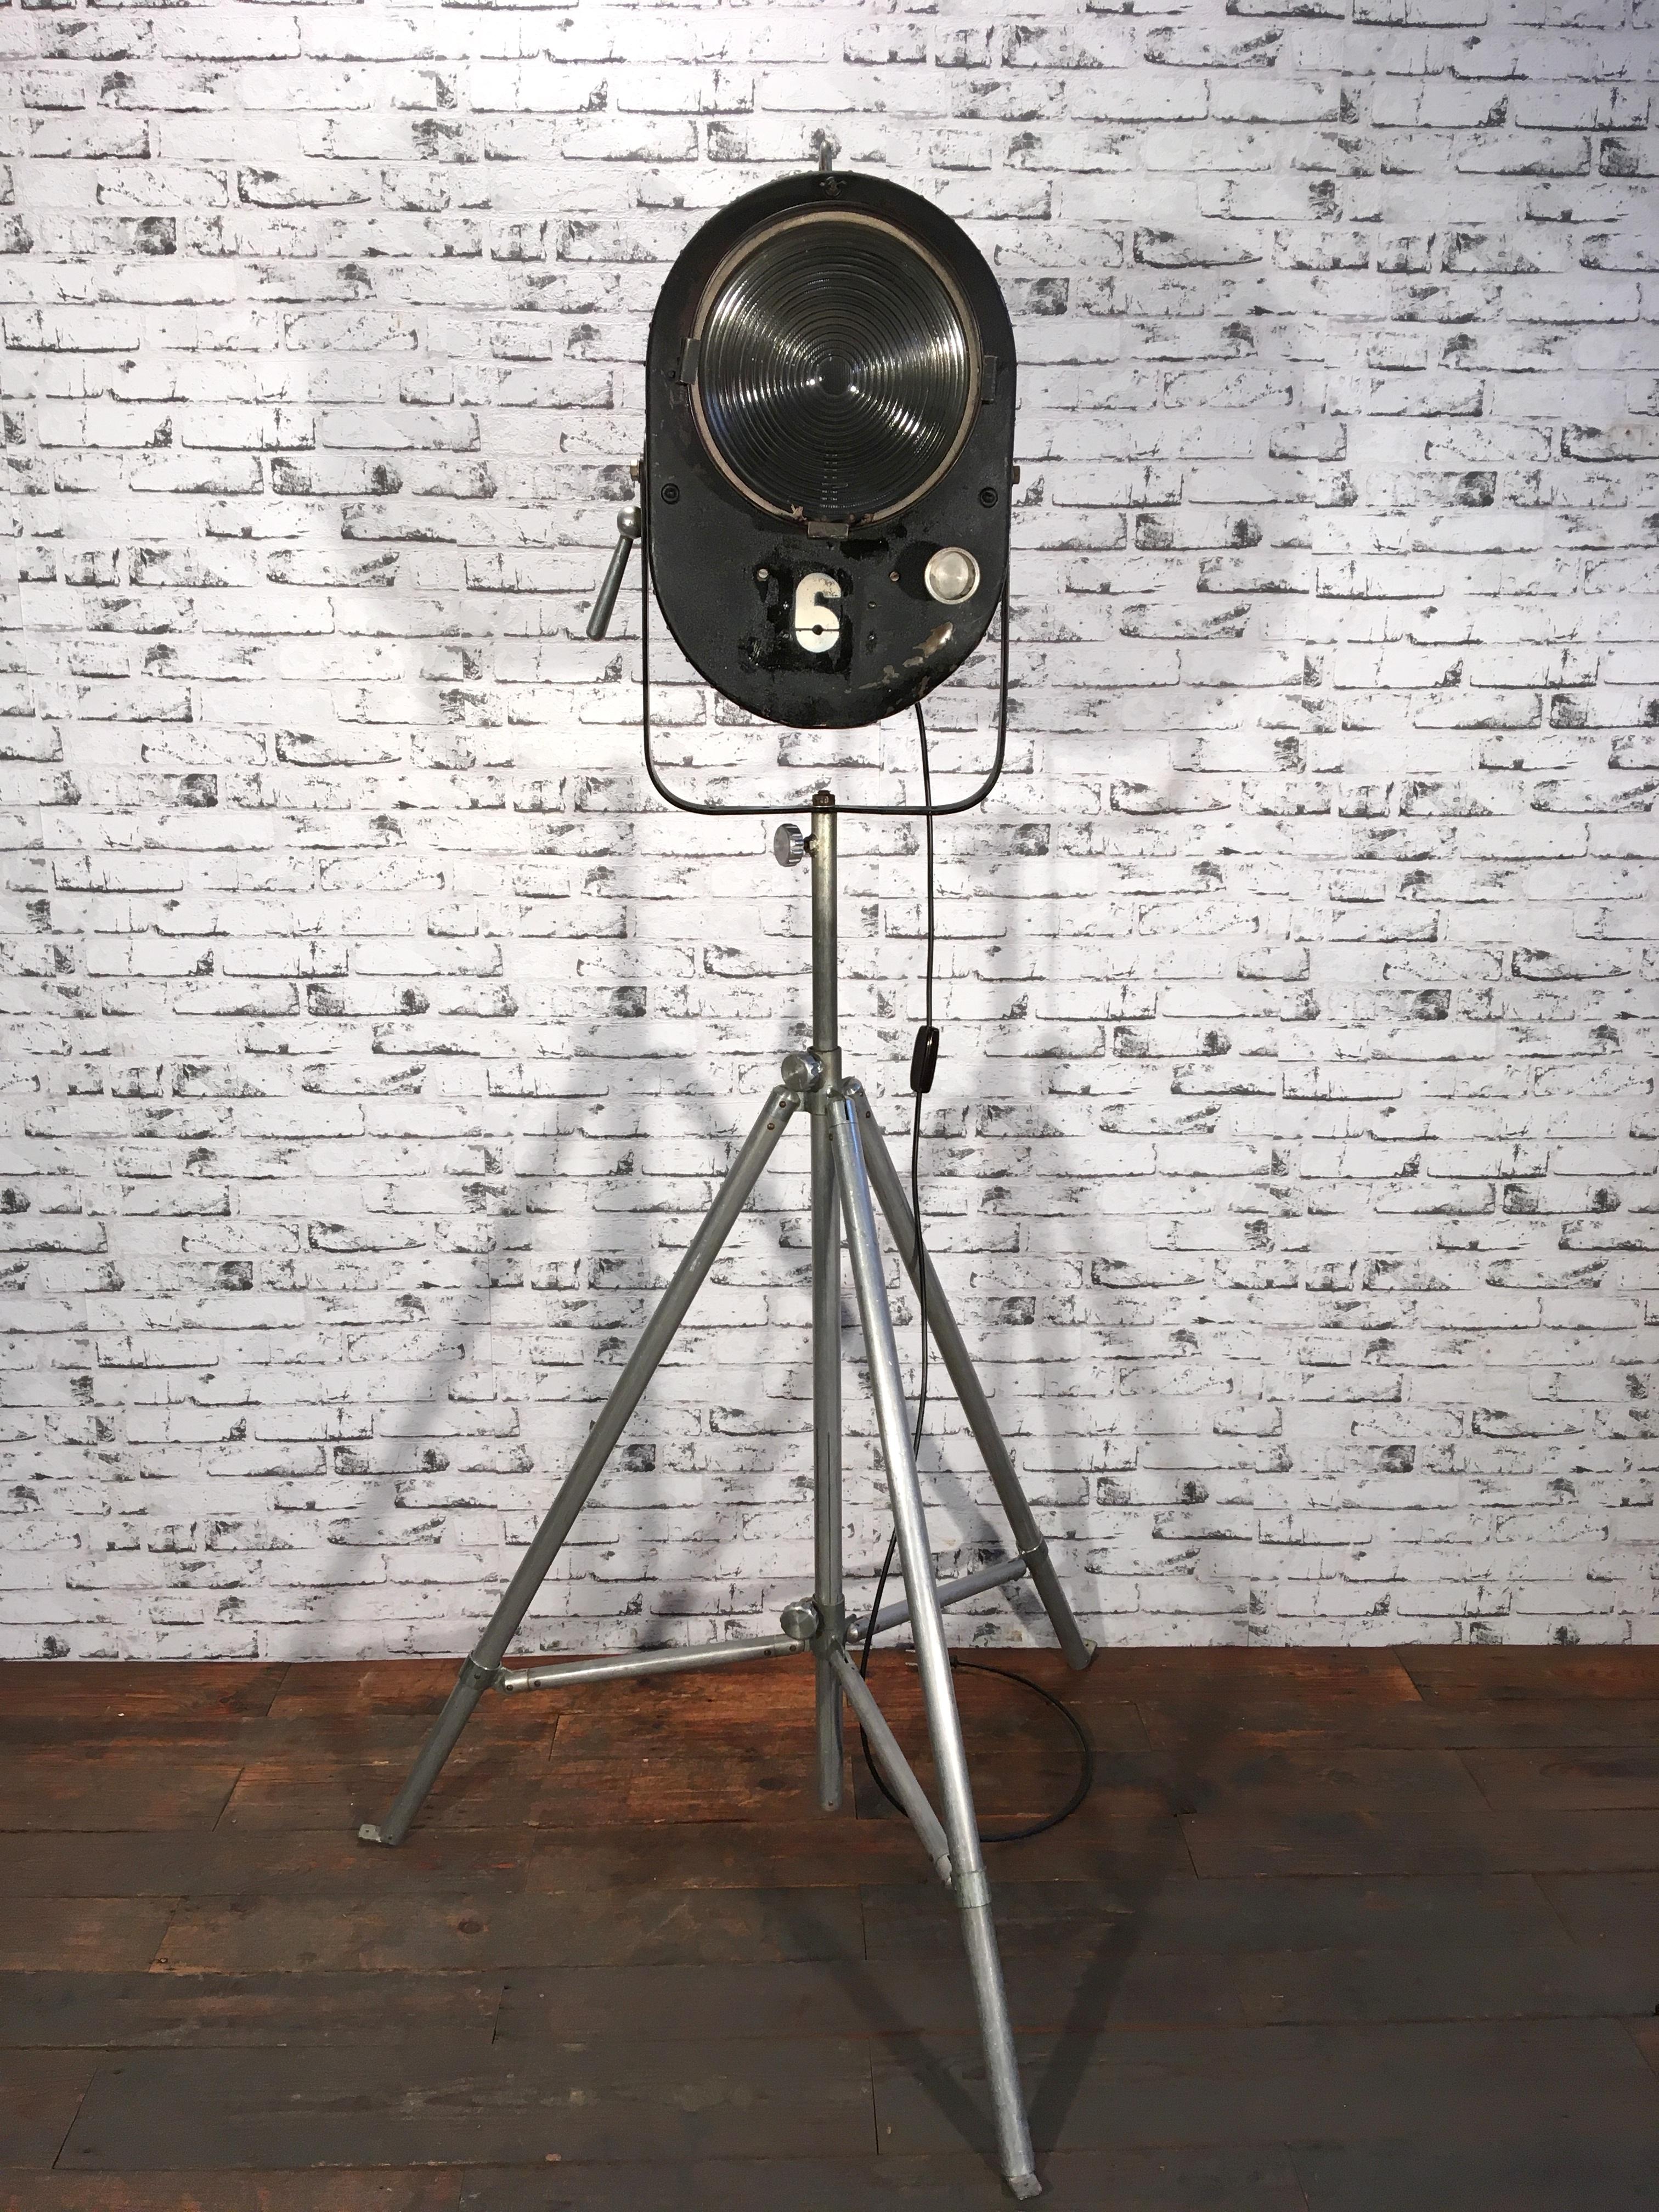 This large adjustable theater reflector on aluminium tripod comes from former Czechoslovakia. It was made during the 1950s. The spotlight has a black metal body and features clear glass. It is fitted with an E 27 socket. Fully functional. Good